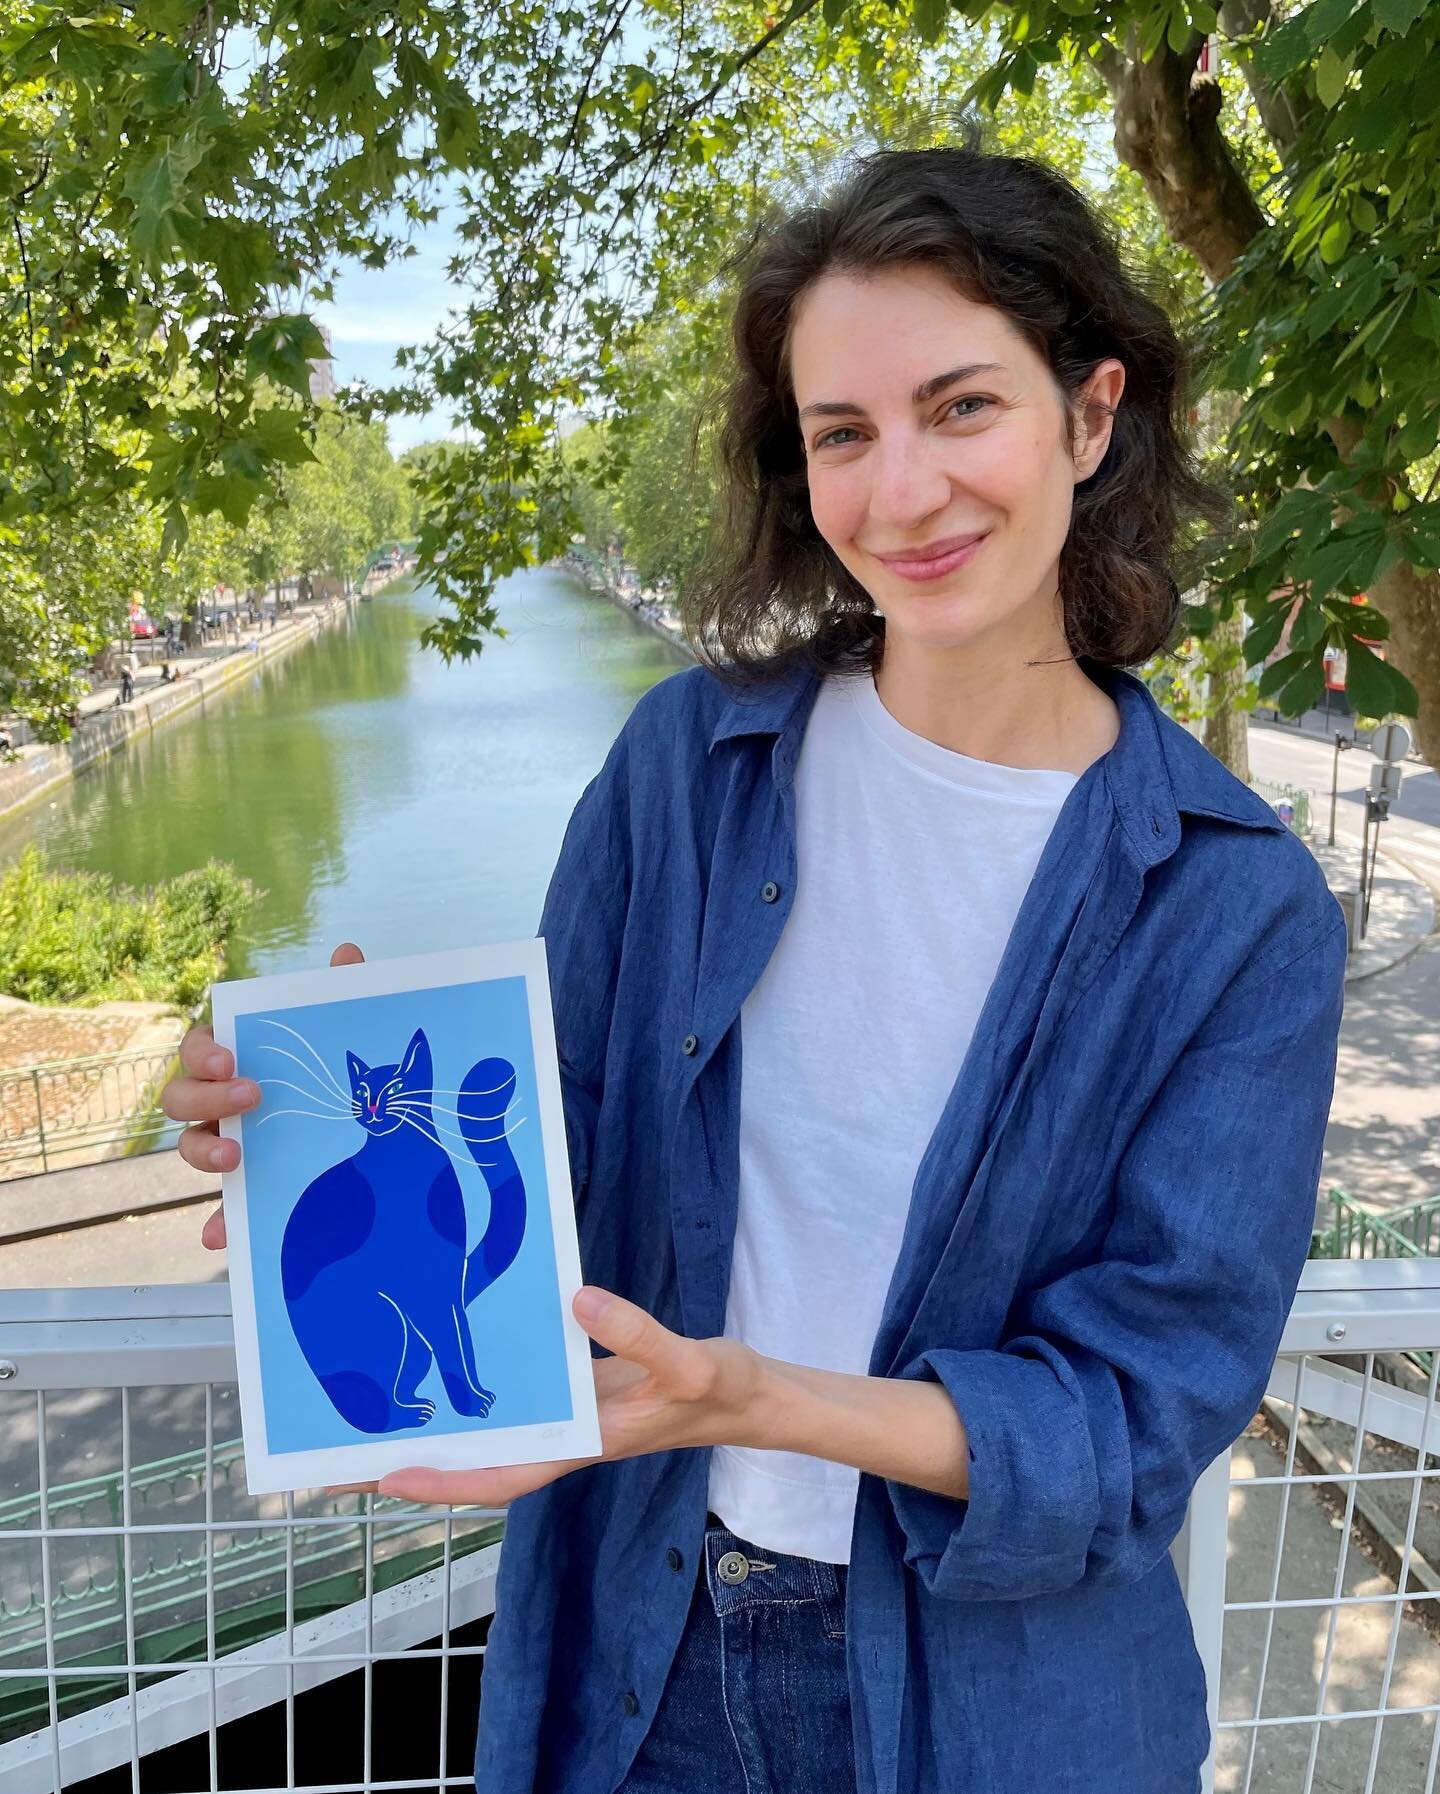 Twenty years ago I arrived in Paris to study applied art and for the first 3 years I was living on the Canal Saint-Martin almost next to Artazart, an amazing library specialised in graphic art, photography and illustration. I&rsquo;m so happy to have